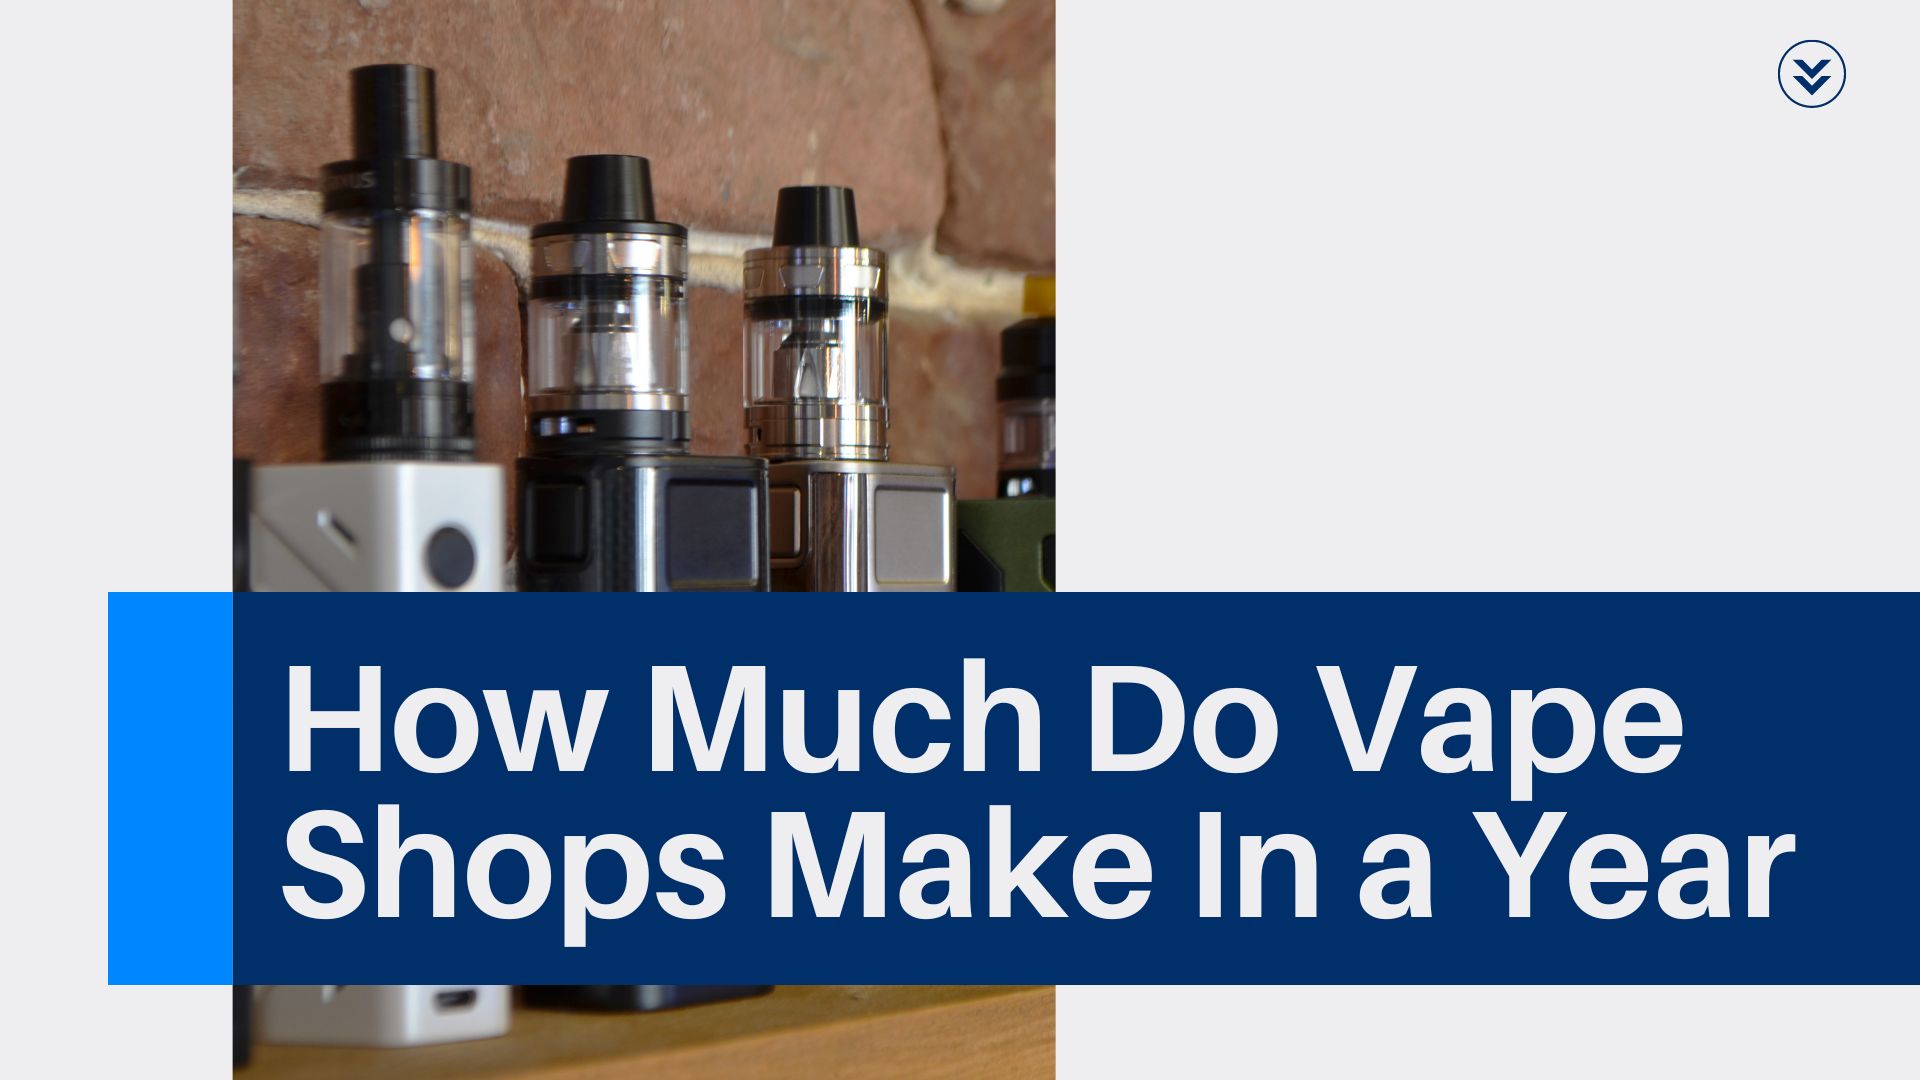 How Much Do Vape Shops Make In a Year